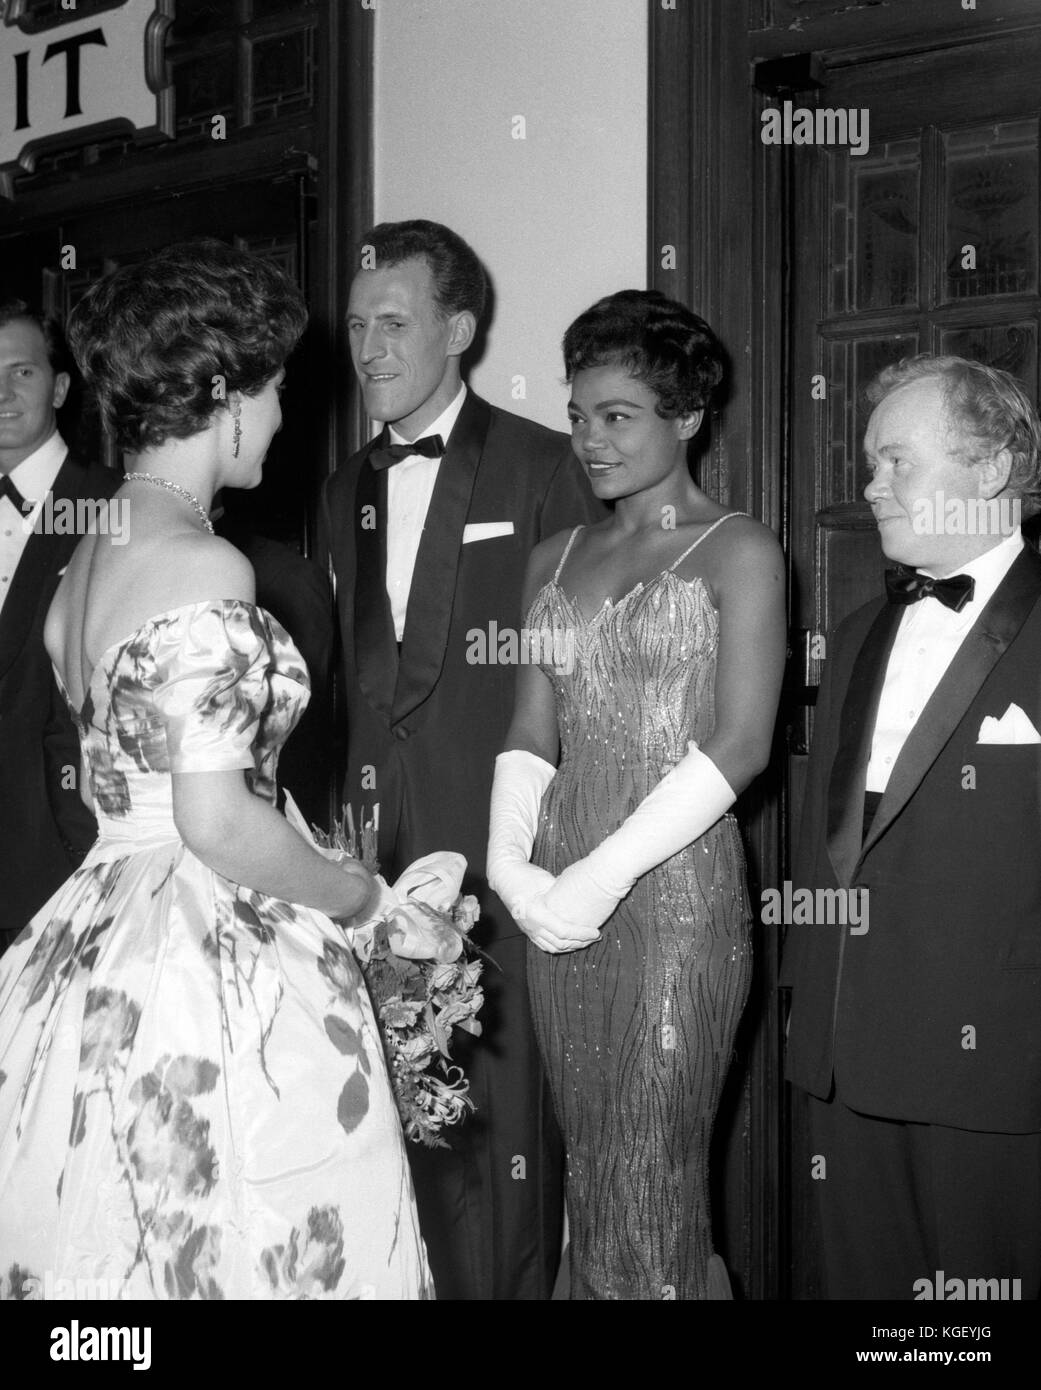 Queen Elizabeth II with singer Eartha Kitt and other performers after the Royal Variety Show at the London Coliseum. Entertainer Bruce Forsyth is on the left. Stock Photo